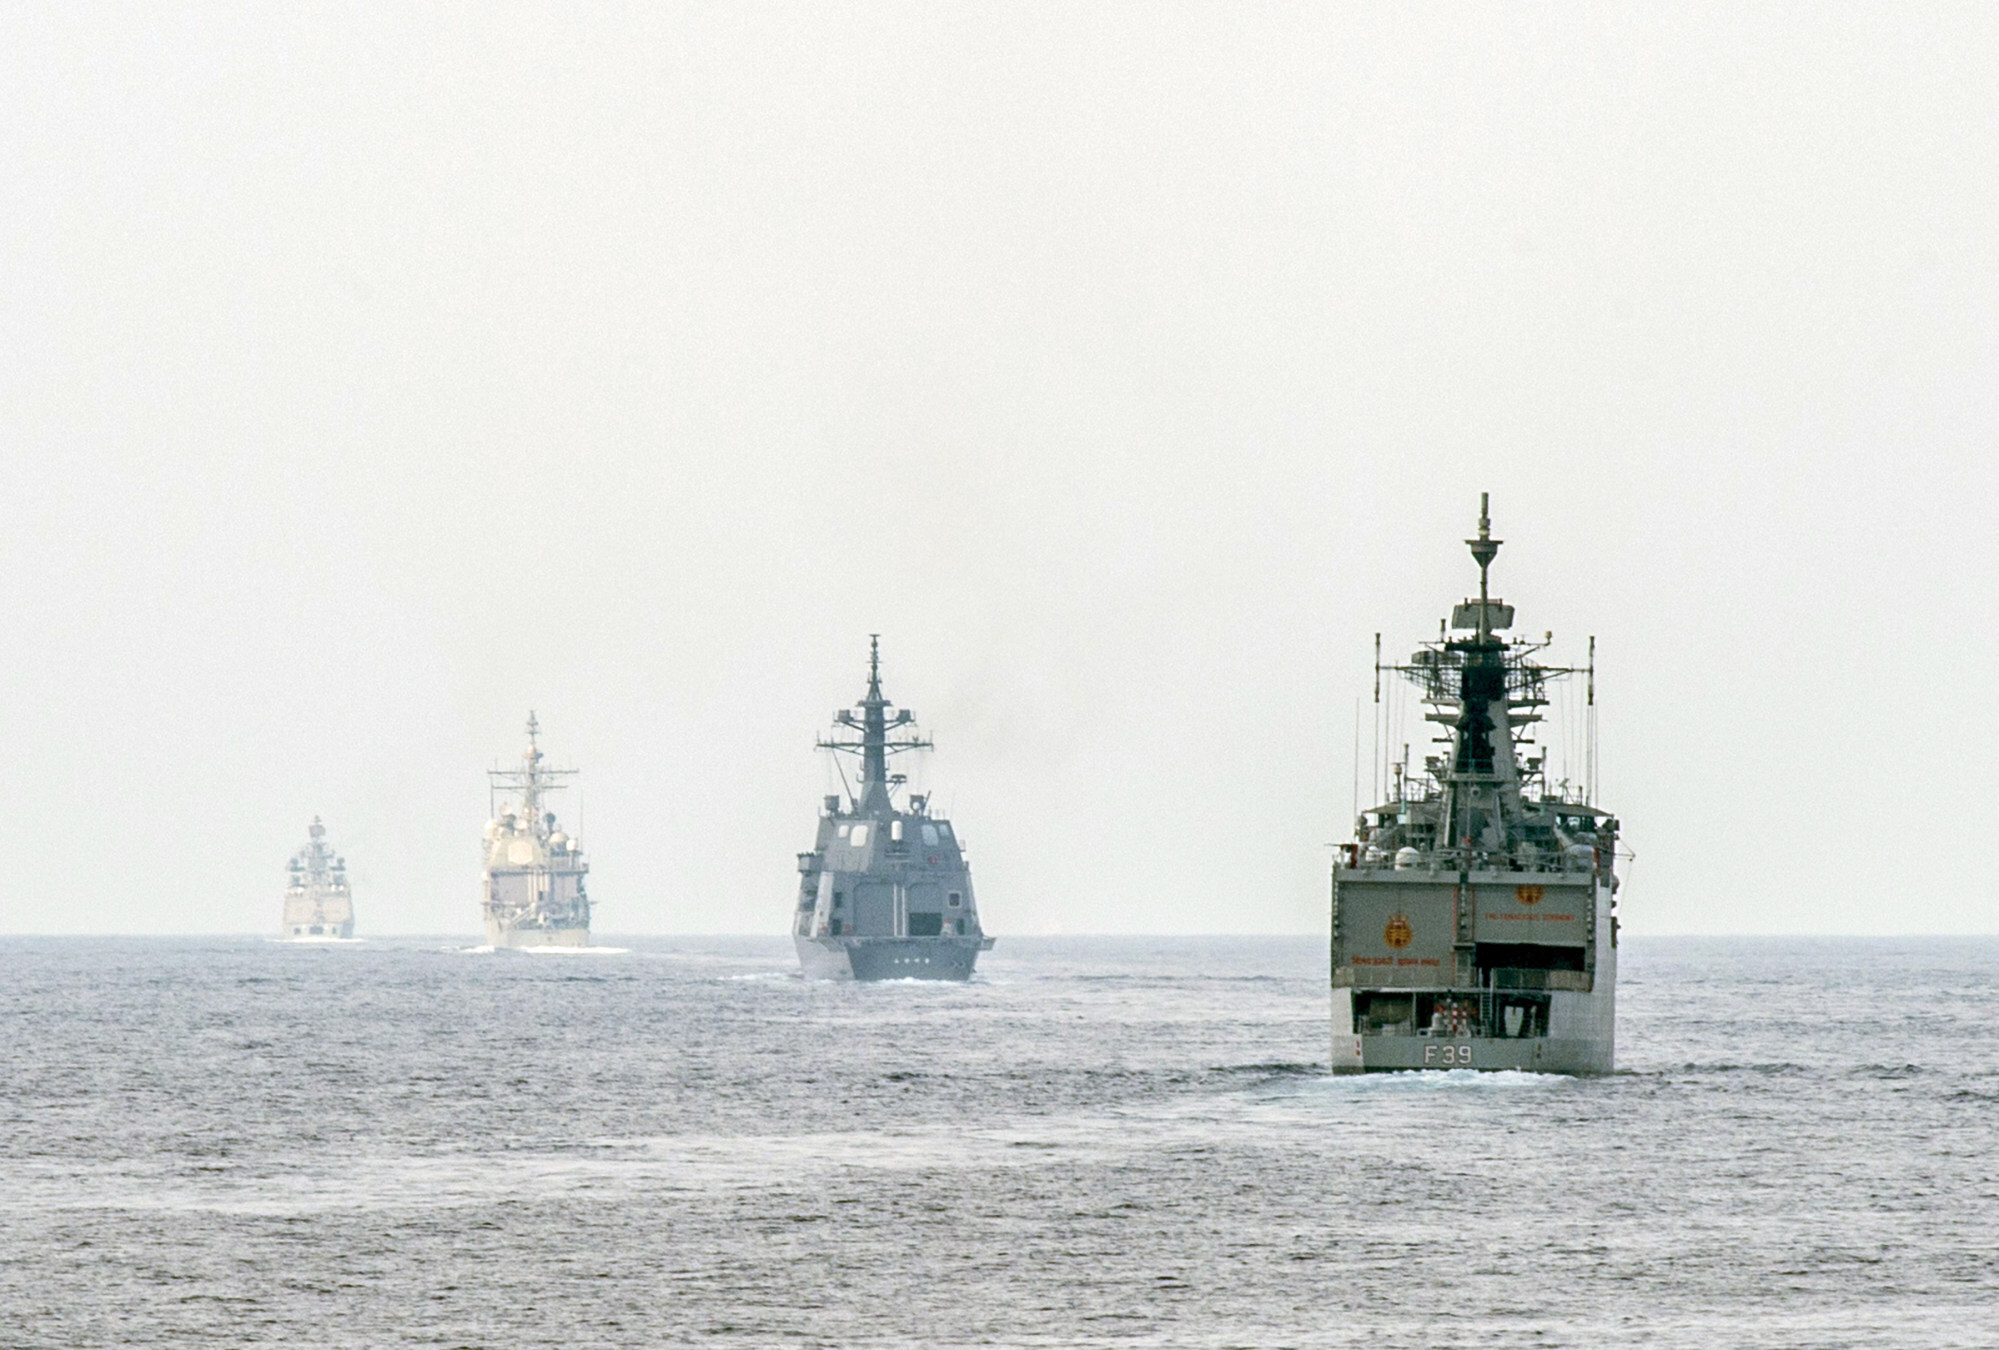 Ships from the Indian, Japanese and US navies take part in a live-fire exercise in the Indian ocean in 2015. Photo: US Navy via AFP